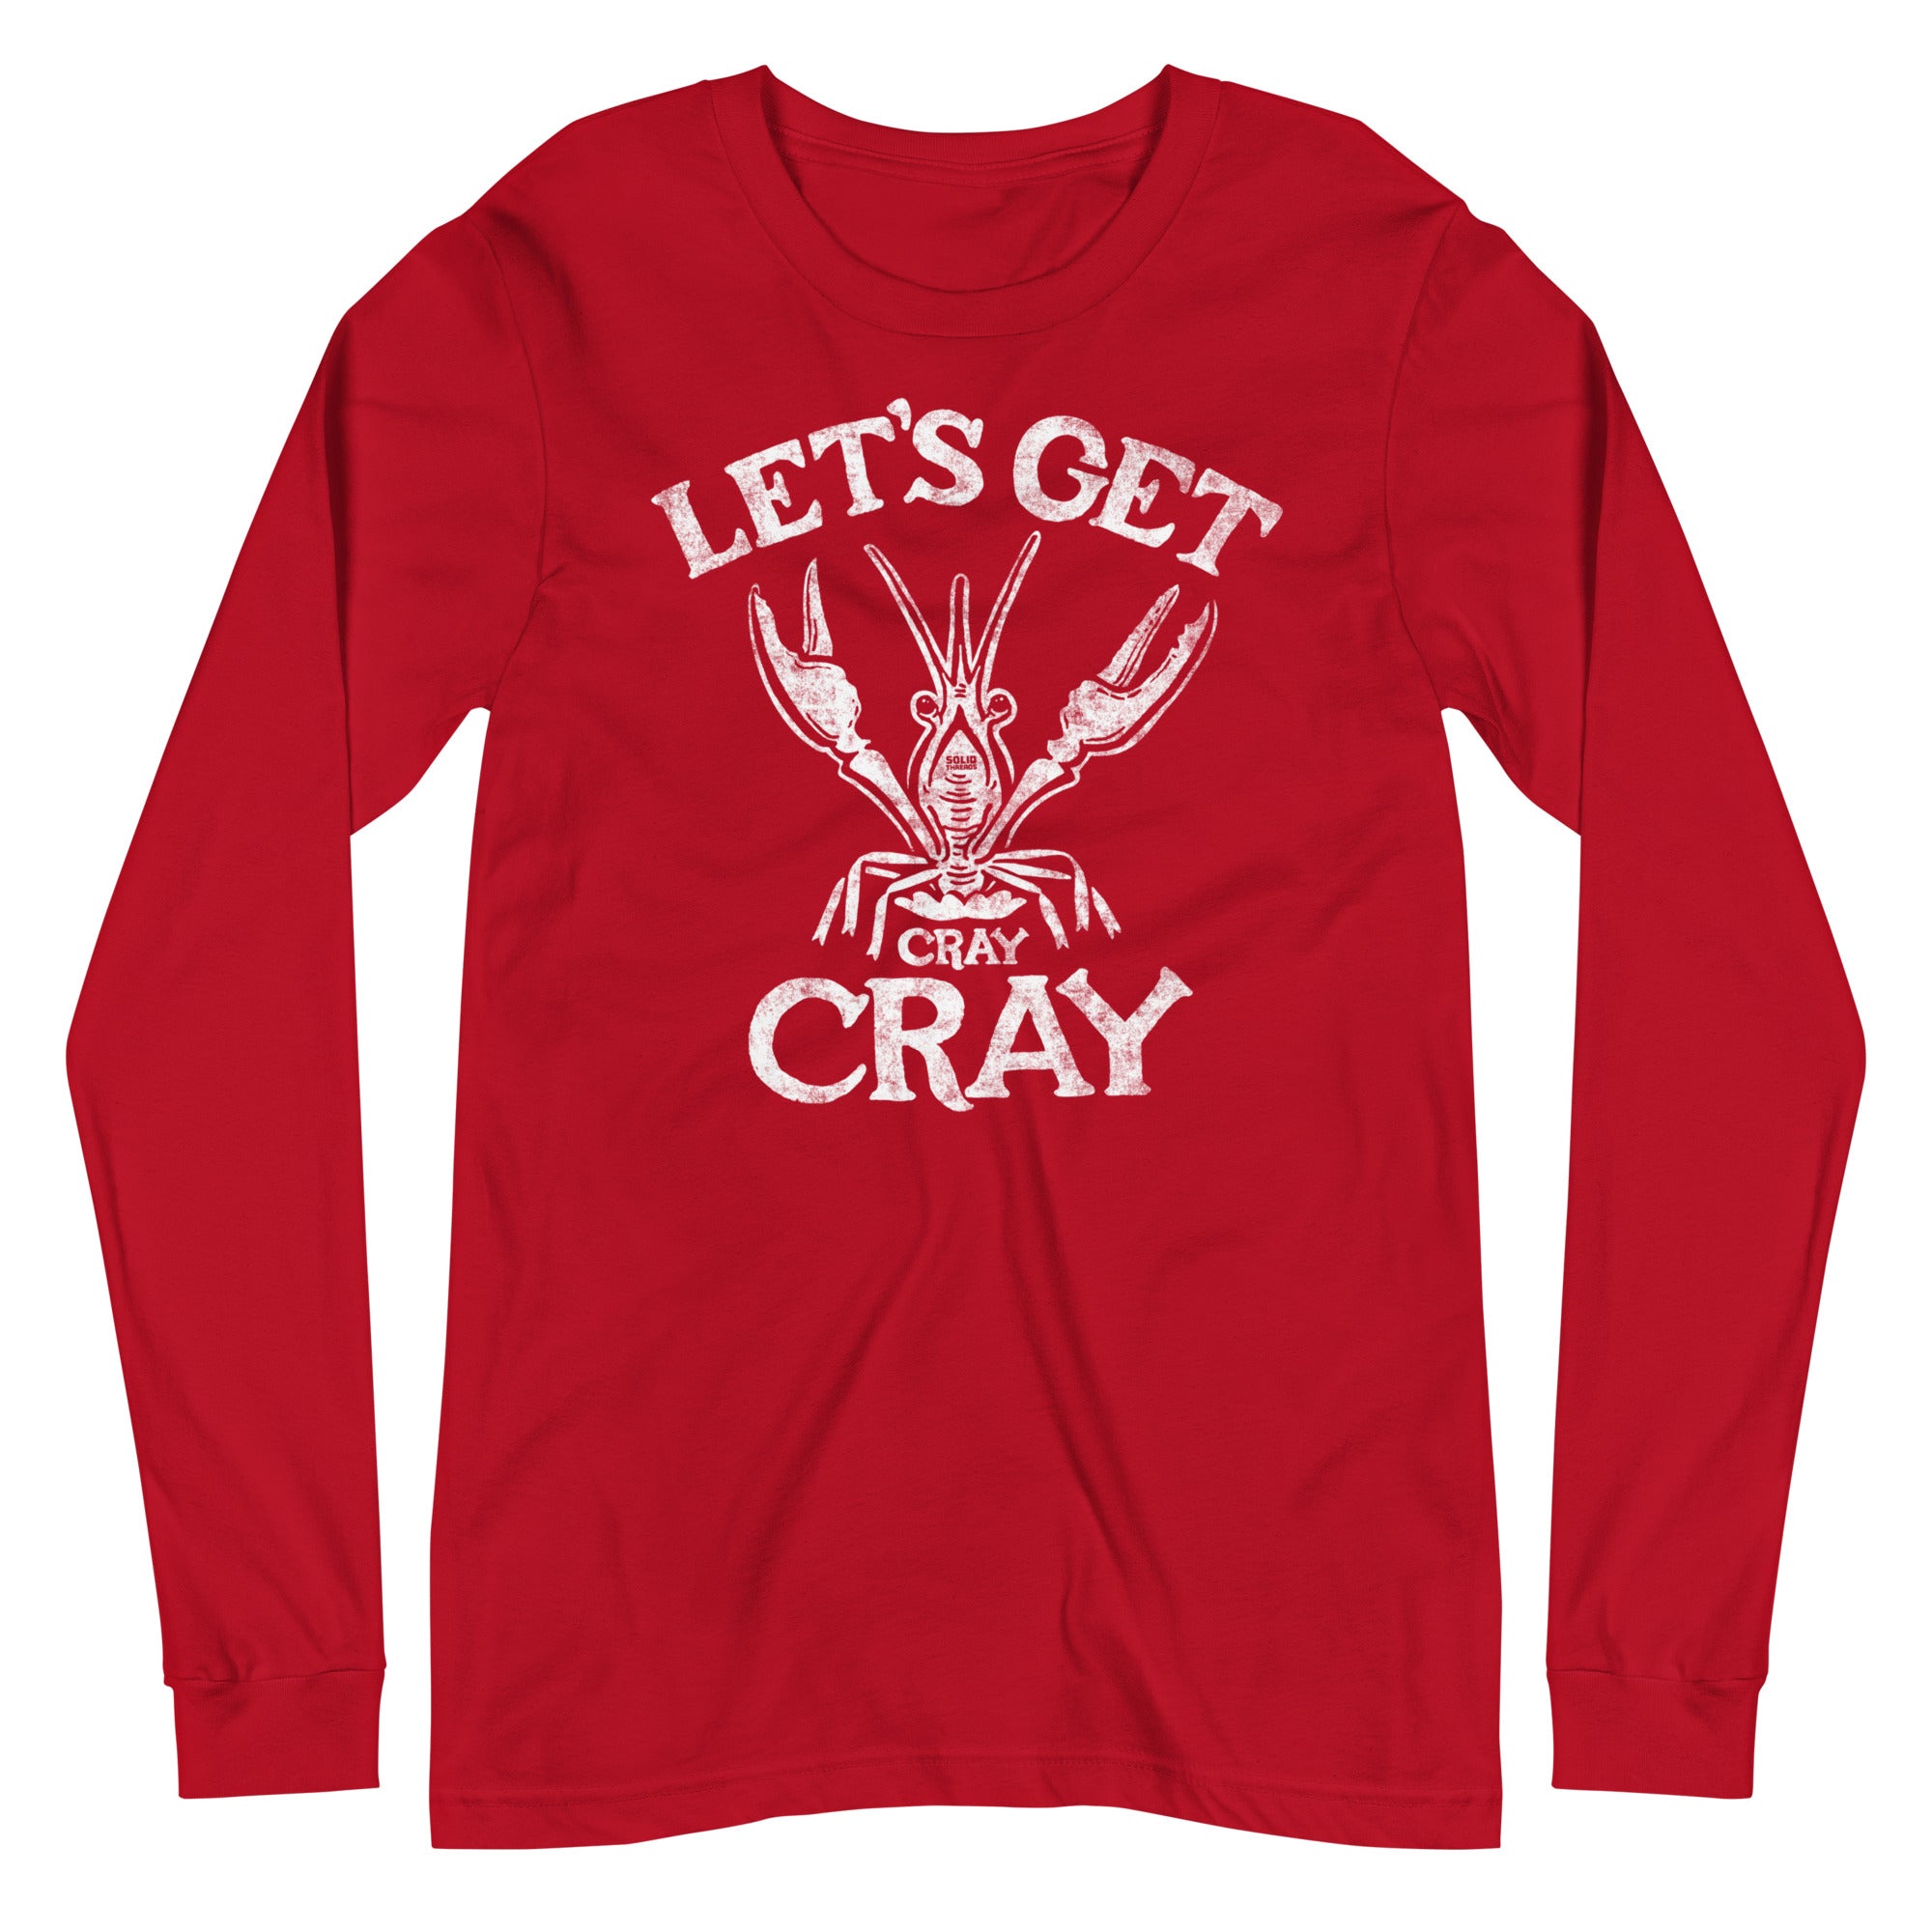 Let's Get Cray Cray Vintage Graphic Long Sleeve Tee | Funny Crawfish T-Shirt - Solid Threads